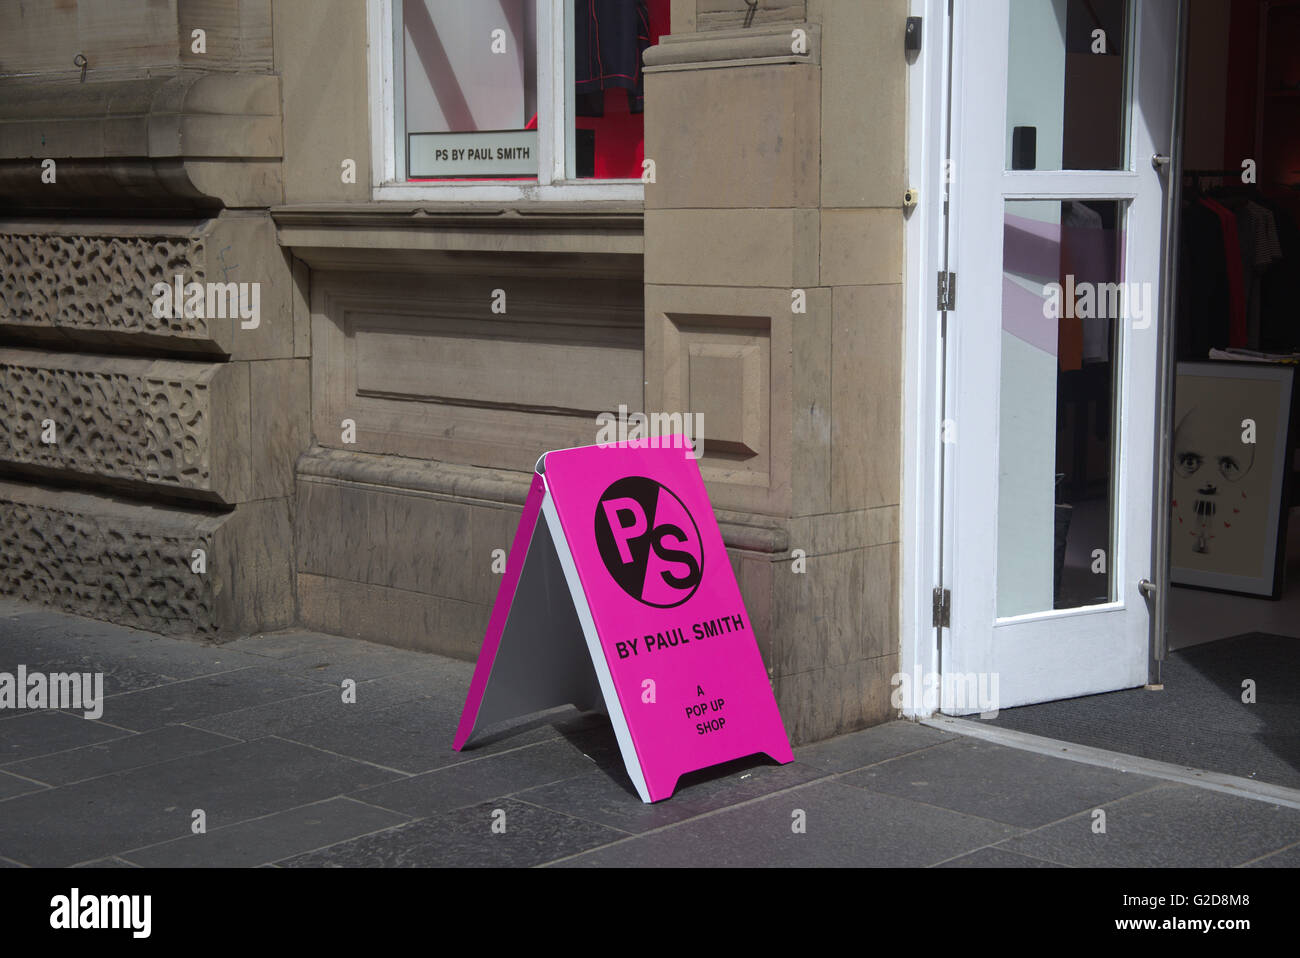 Glasgow, UK. 28th May, 2016.     The  iconic British designer Paul Smith has opened   his first ever  Scottish store, a pop-up concept   shop,whuch will open for a six month run. His   special feeling for the city was recently highlighted   in  his ‘Hello, my name is Paul Smith’ exhibition that    ran in 'The Lighthouse' design centre earlier this   year.     Credit:  gerard ferry/Alamy Live News Stock Photo